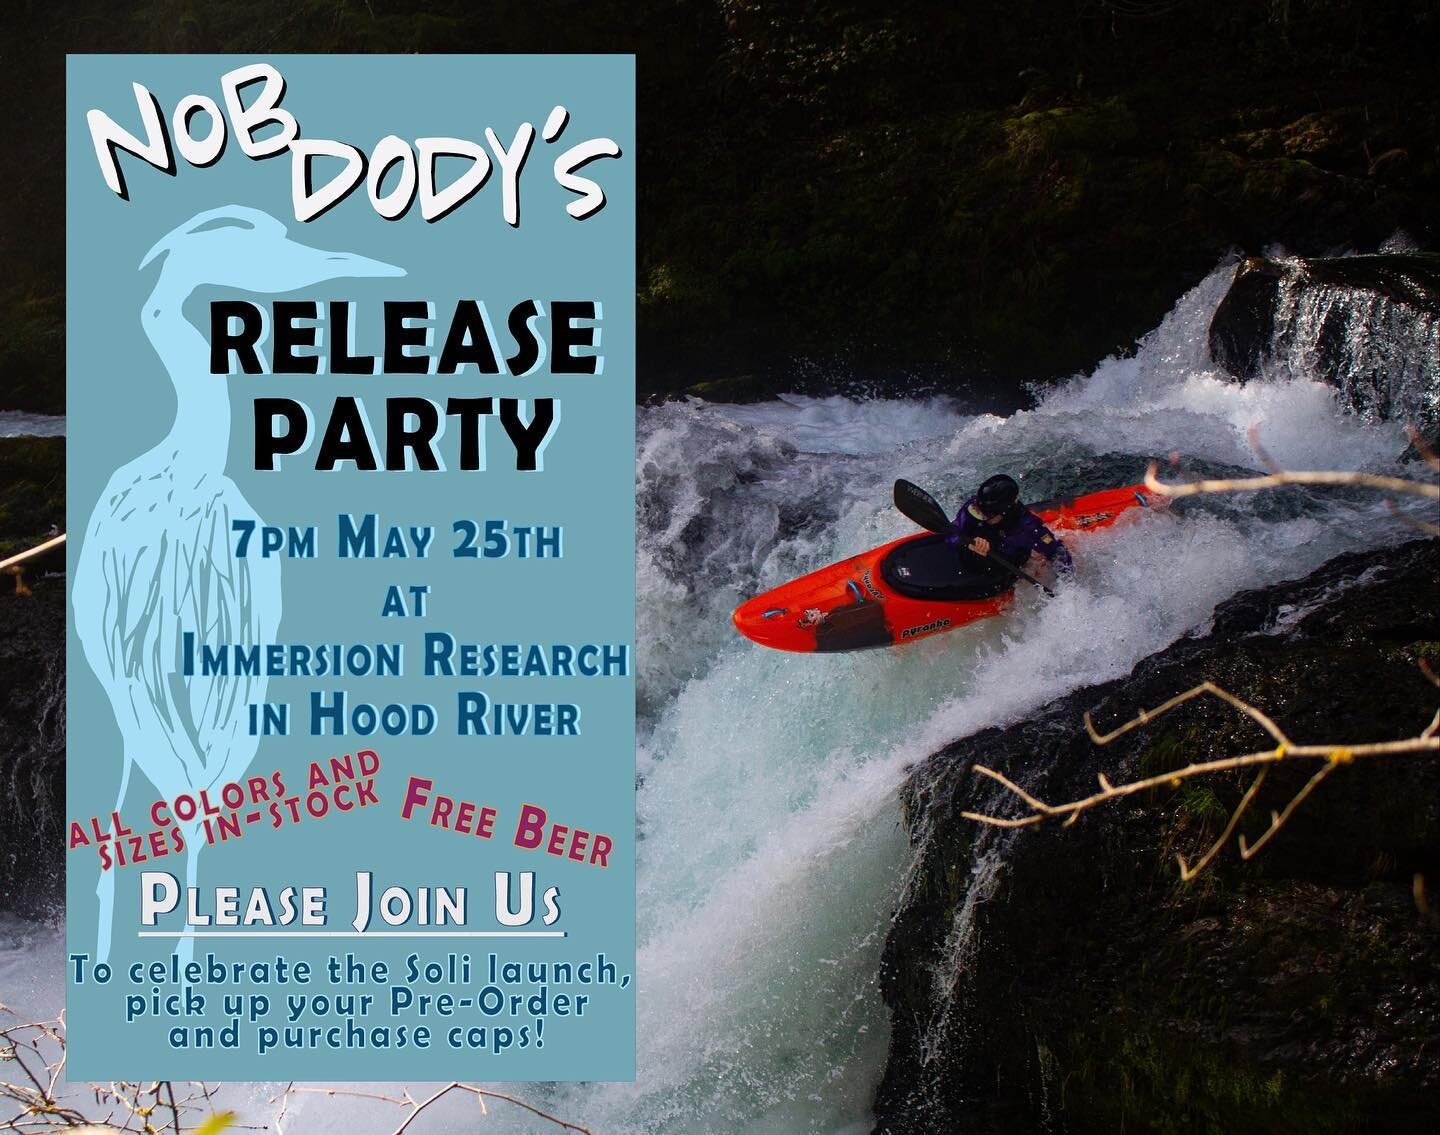 We are thrilled to share the official Nobdody&rsquo;s release! 

Join us the evening of Thursday, May 25th at Immersion Research in Hood River to pick up your pre-order, purchase a hat, and share a beer with friends. 

If you don&rsquo;t live locally